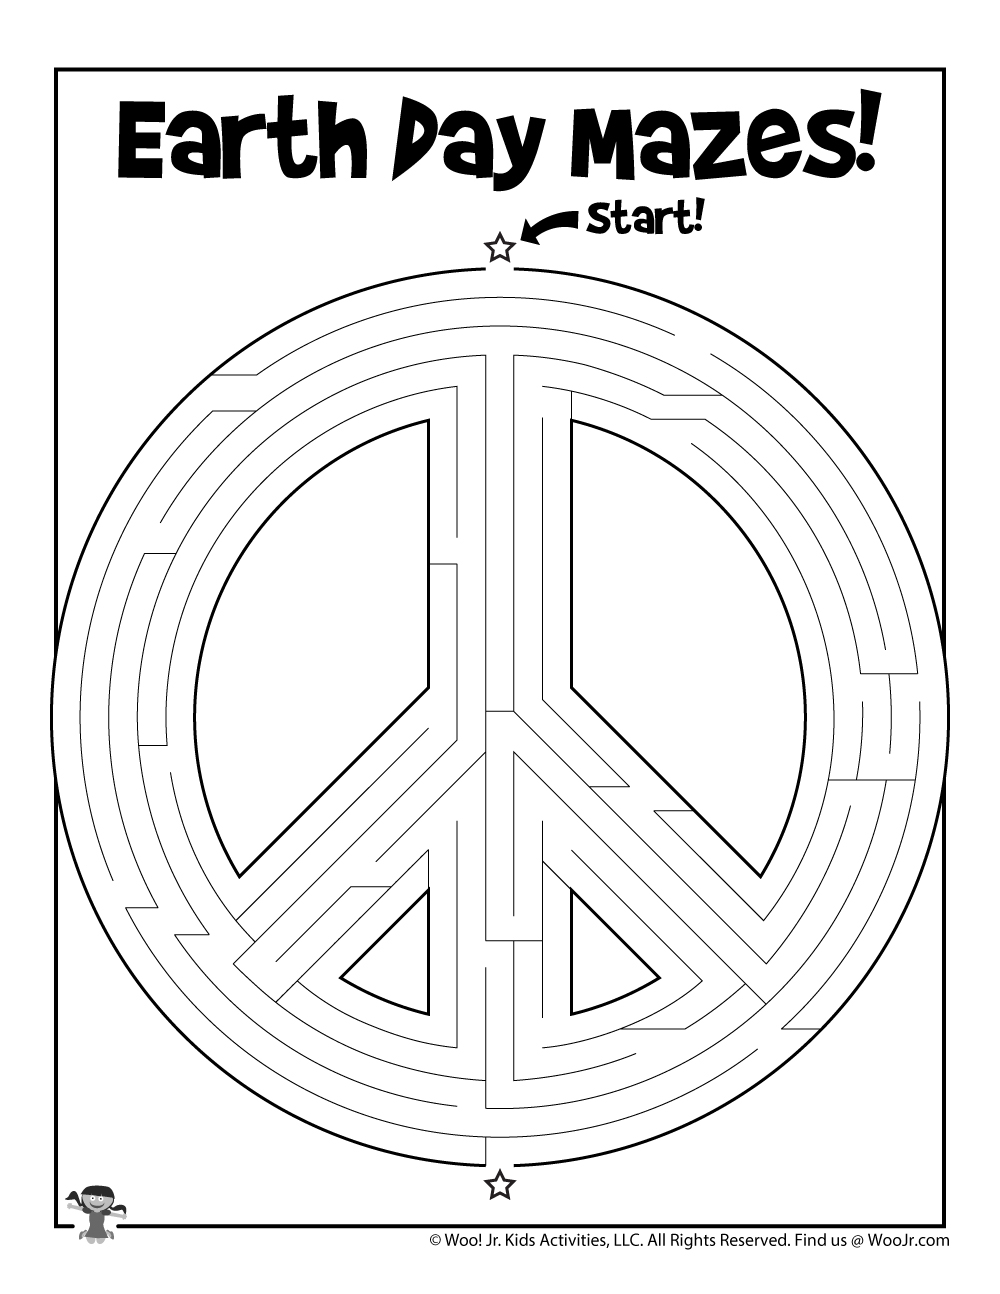 Printable earth day mazes woo jr kids activities childrens publishing